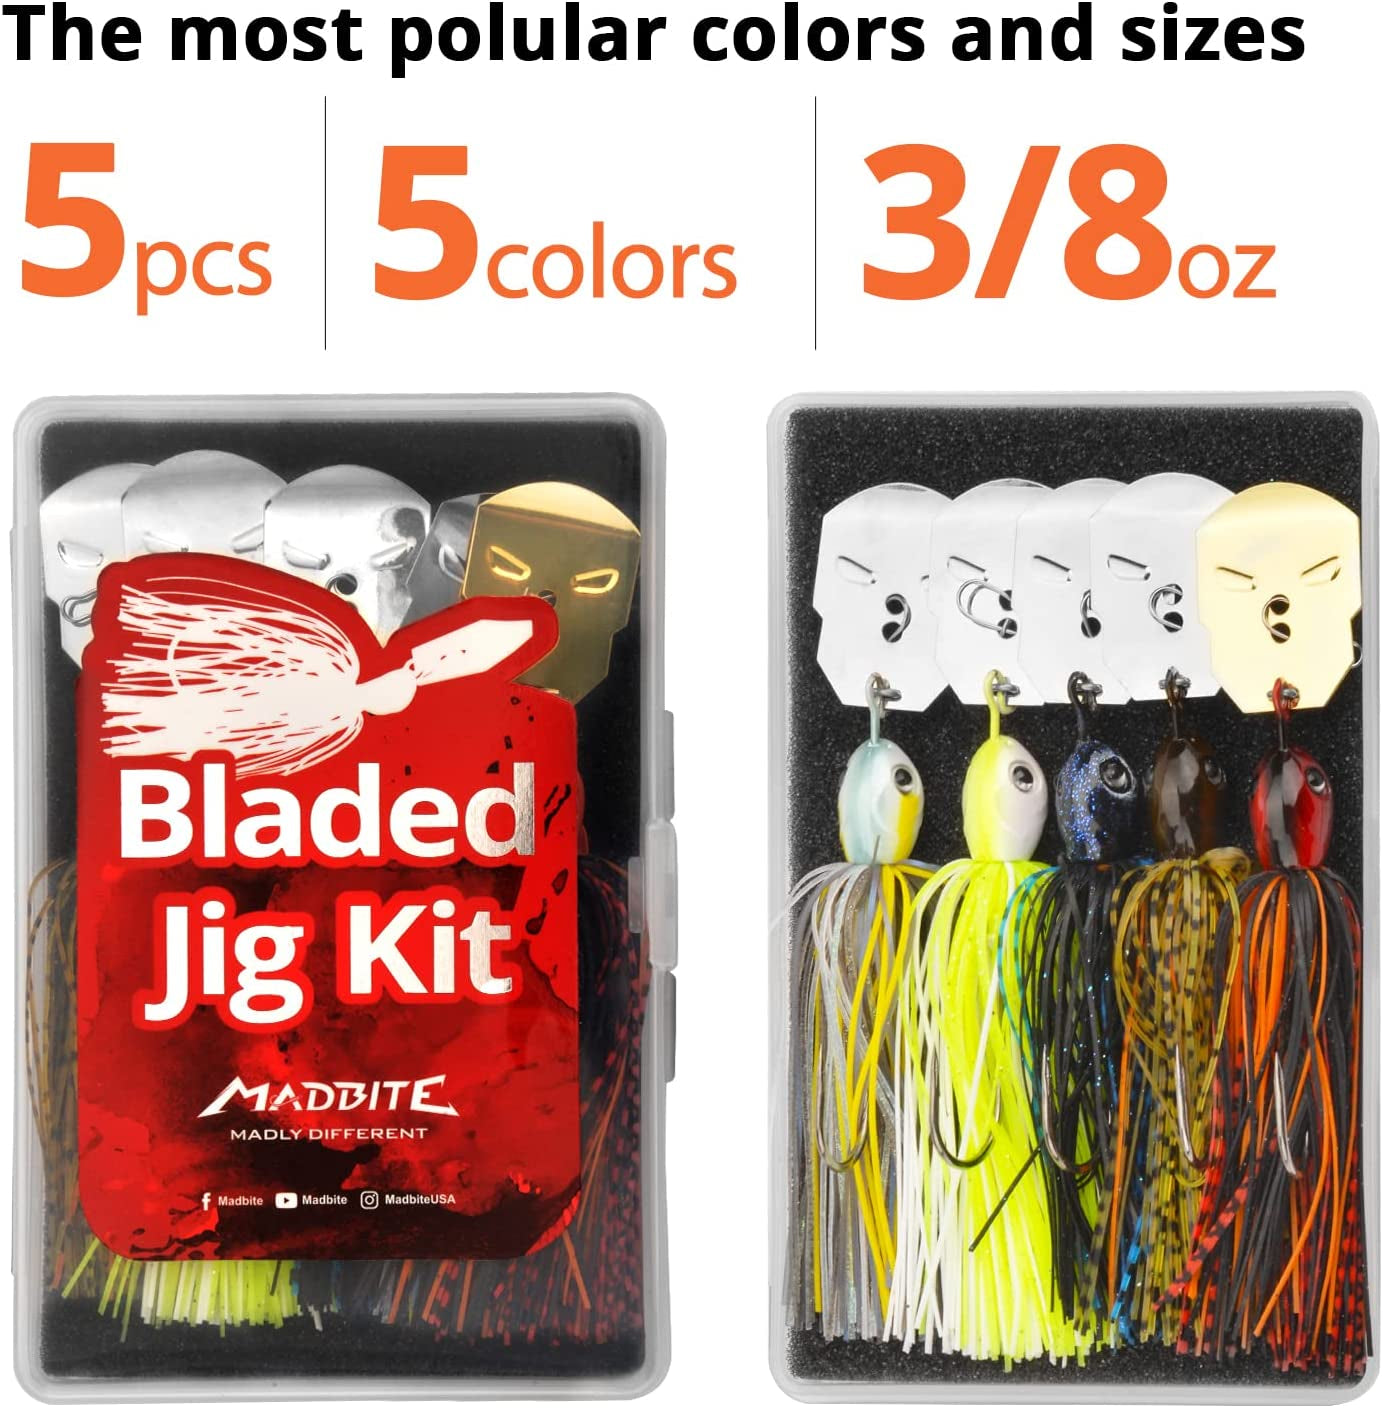 Bladed Jig Fishing Lures, 5 Pc and 3 Pc Multi-Color Kits, Irresistible Vibrating Action, Sticky-Sharp Heavy-Wire Needle Point Hooks, Popular 3/8 Oz and 1/2 Oz Sizes, Includes Storage Box